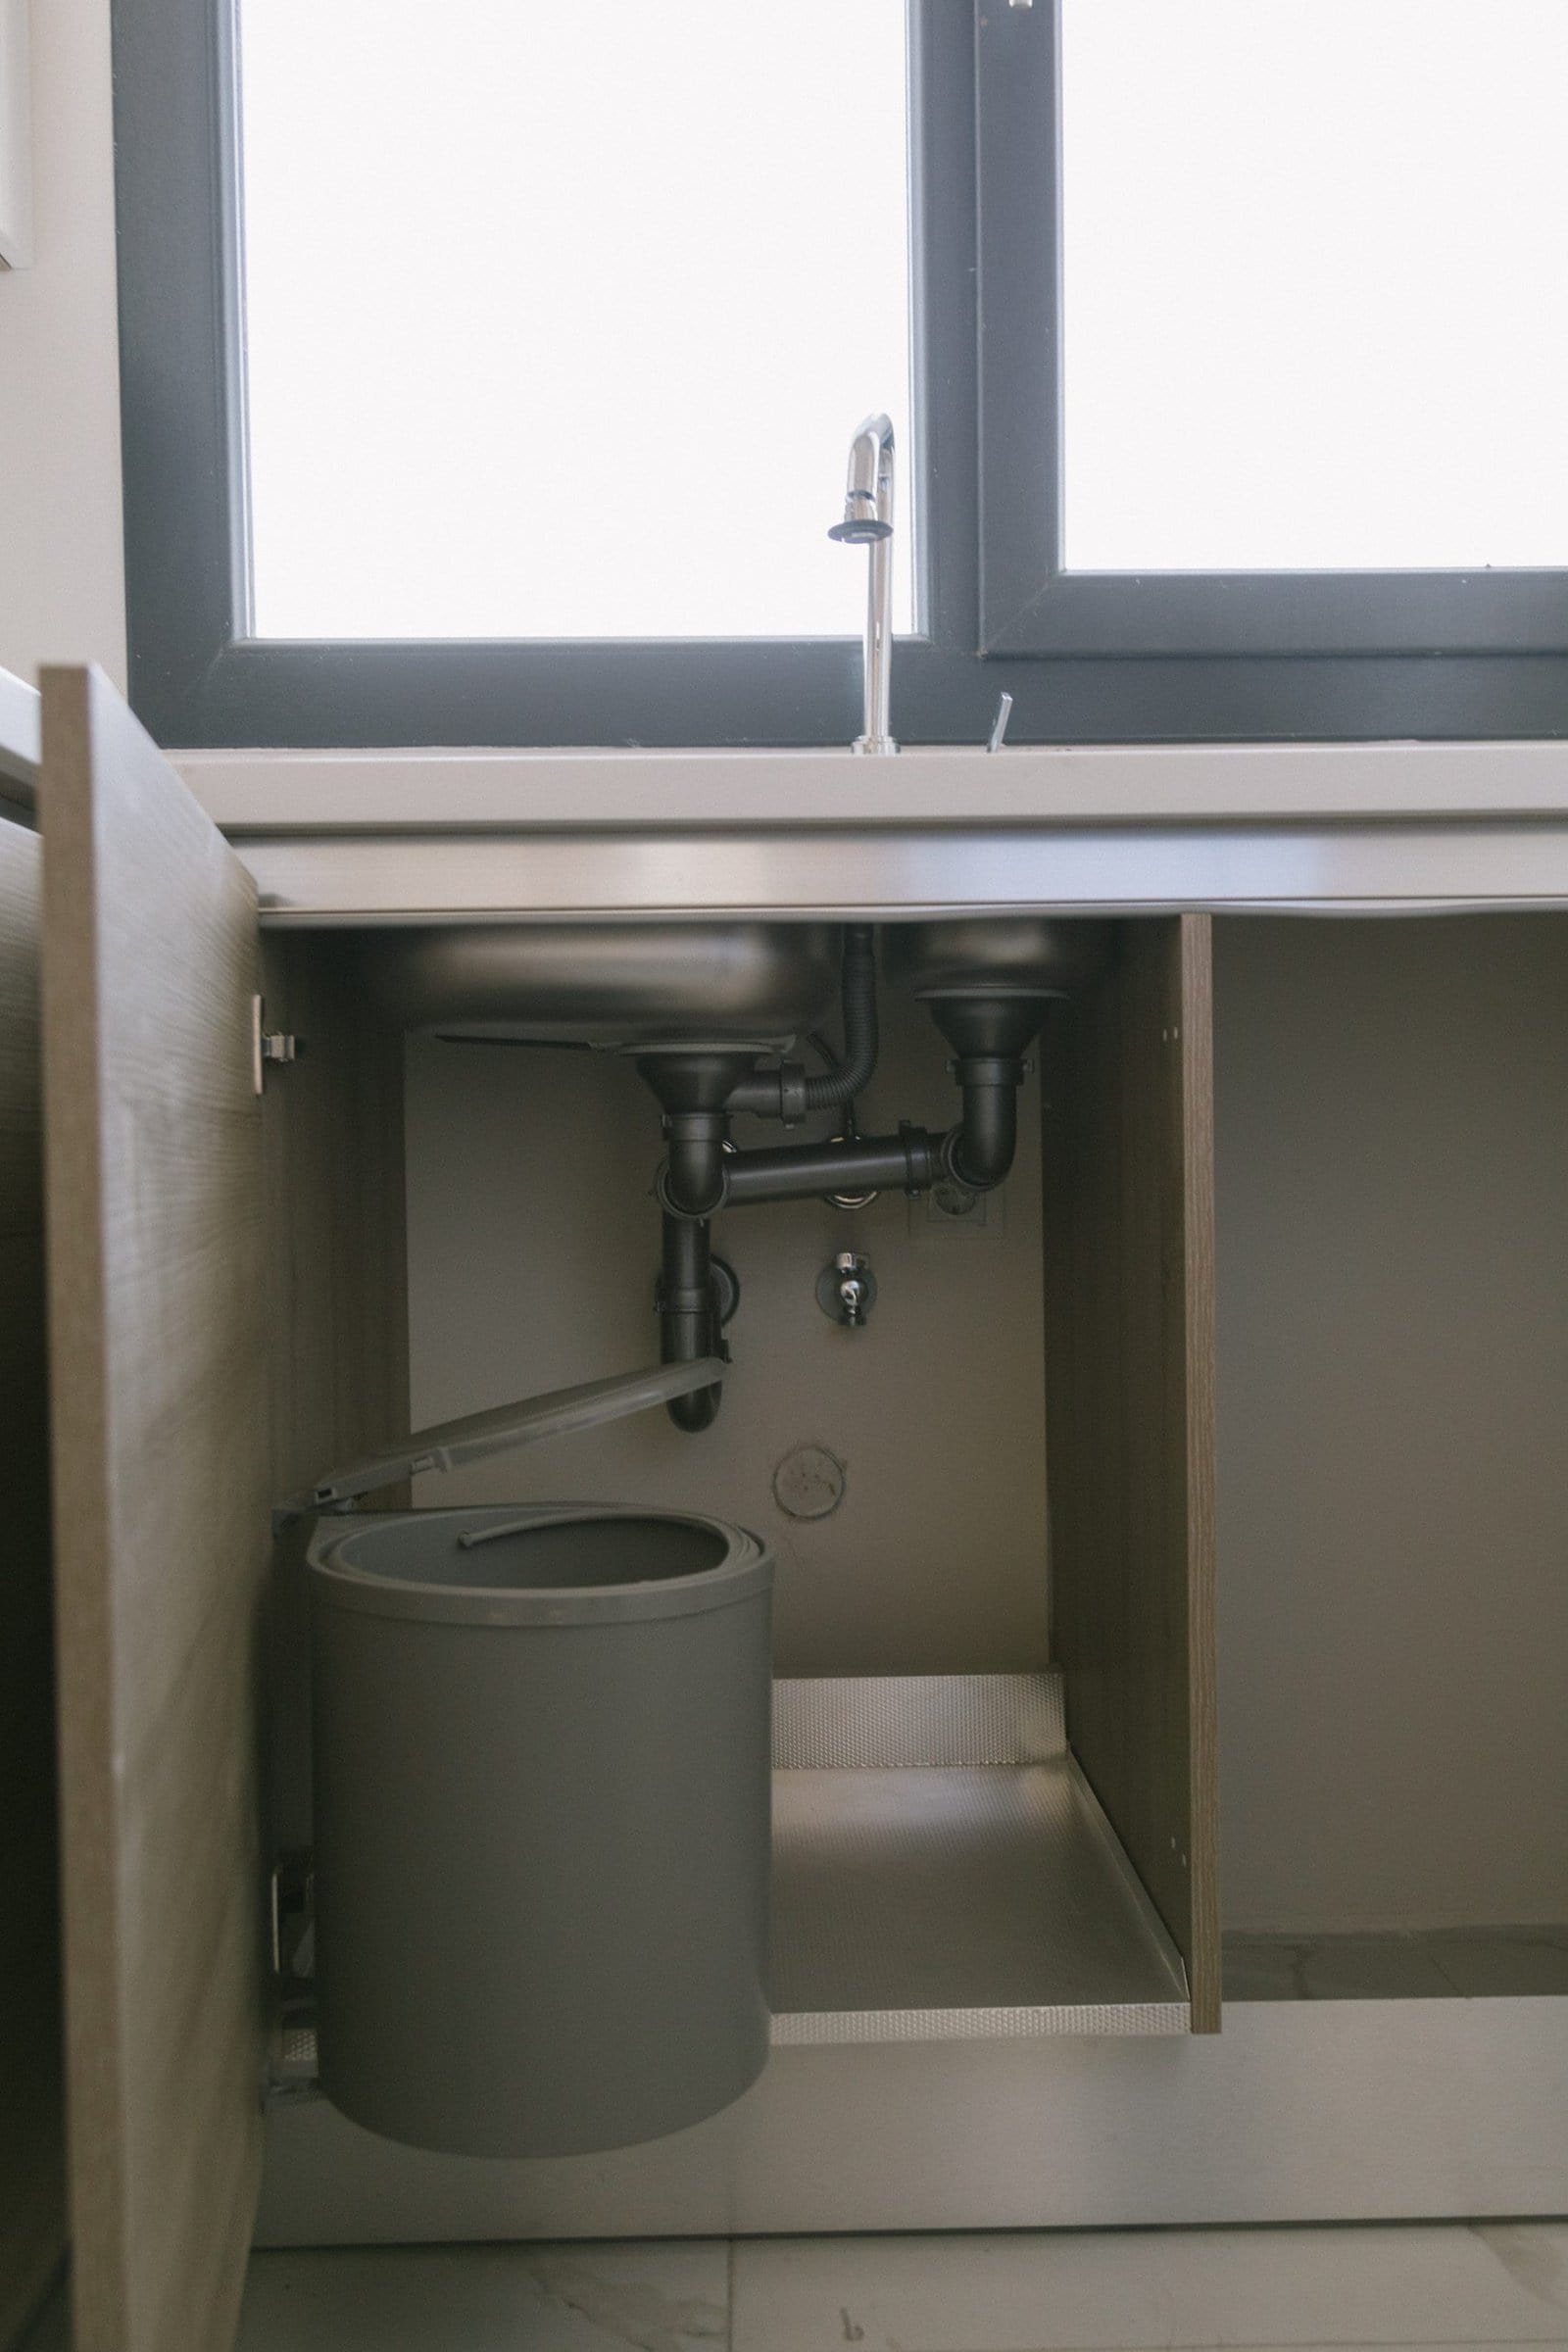  undersink trash can scaled